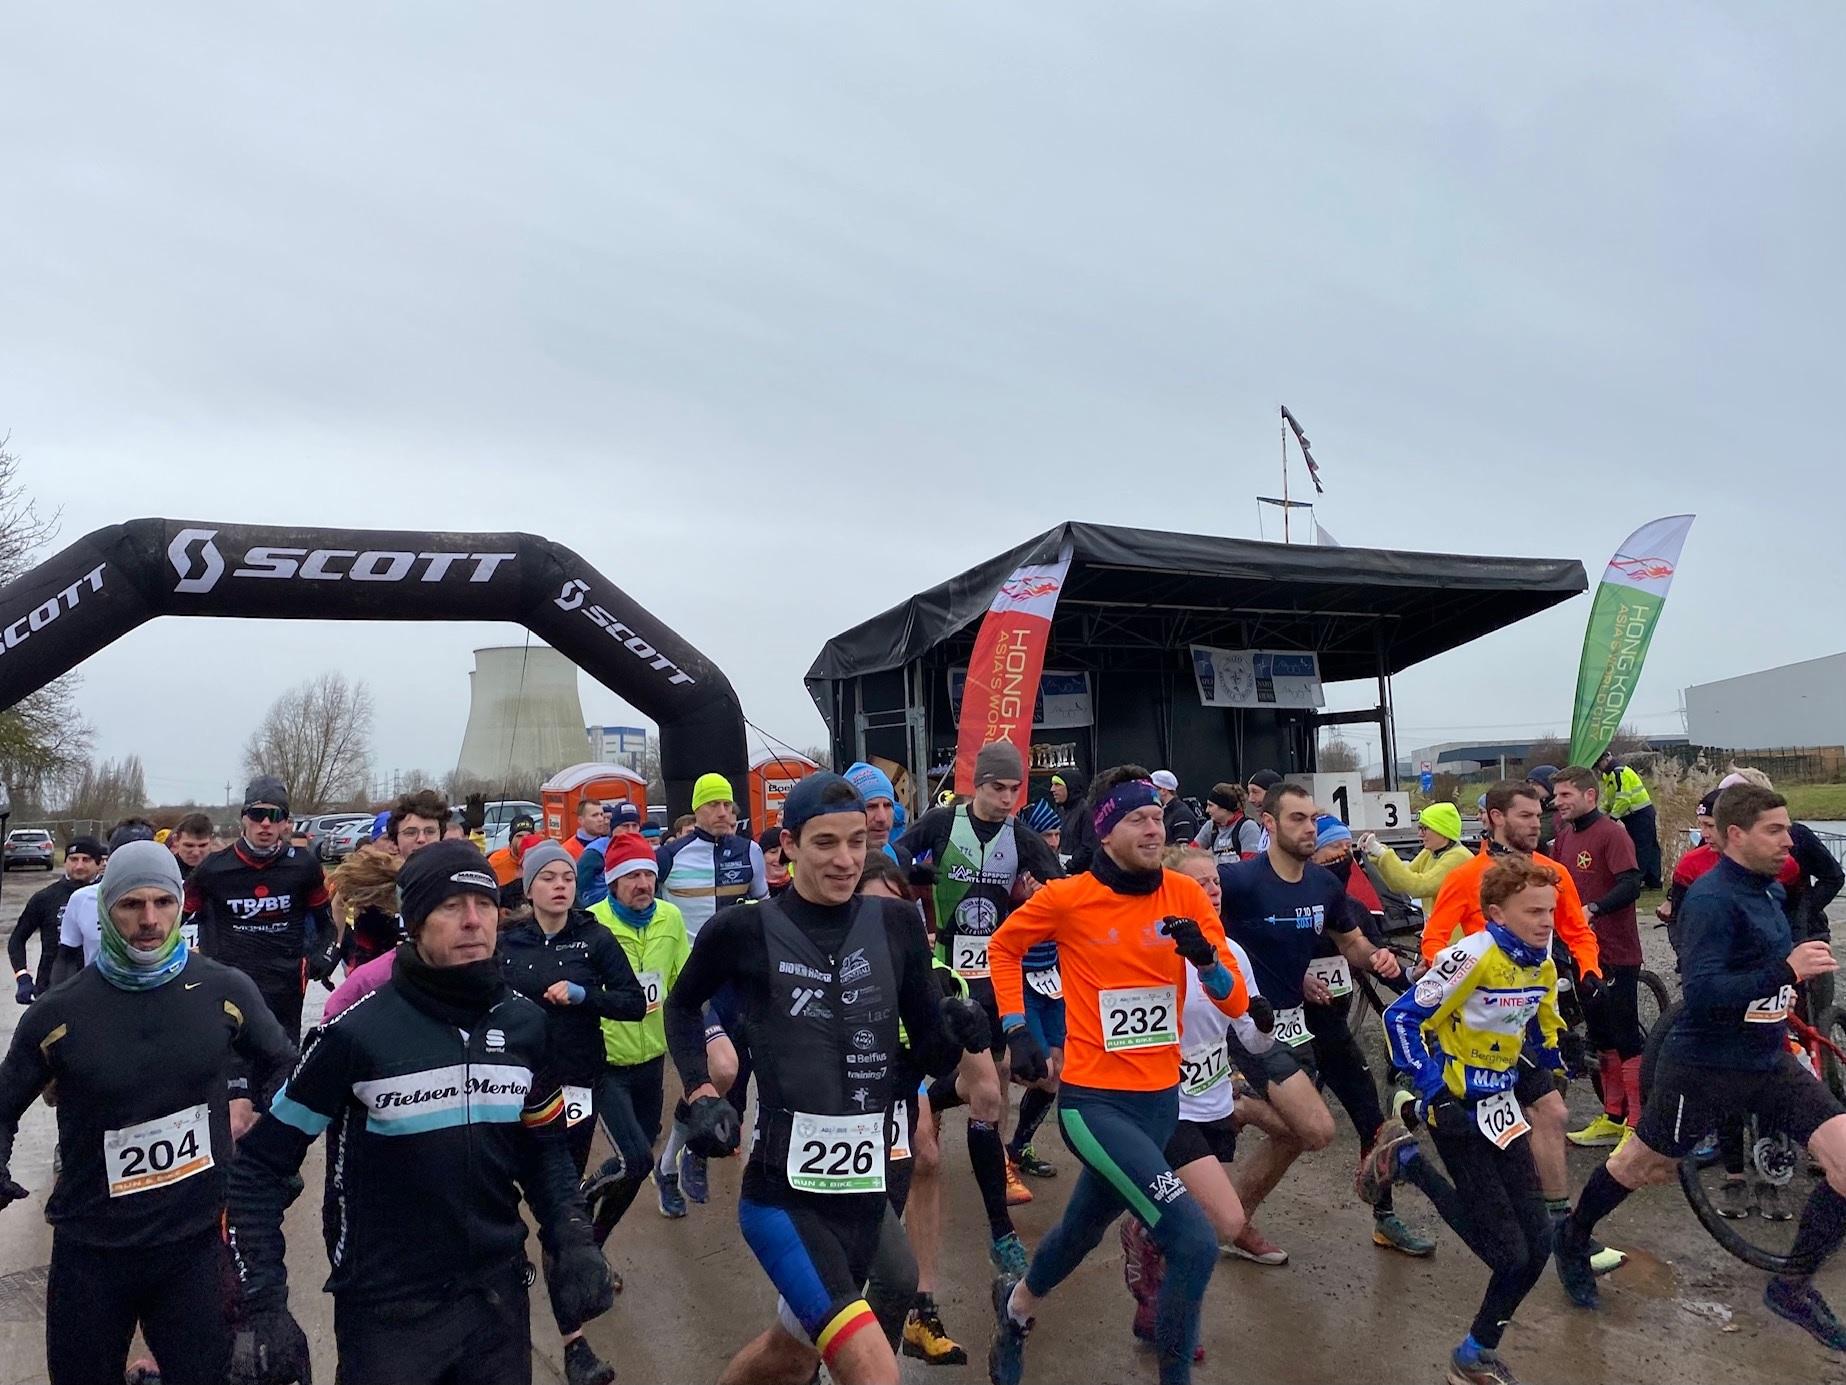 About 125 teams participated in the Run & Bike sports event in Vilvoorde, Belgium on January 8 (Brussels time) sponsored by the Hong Kong Economic and Trade Office, Brussels.